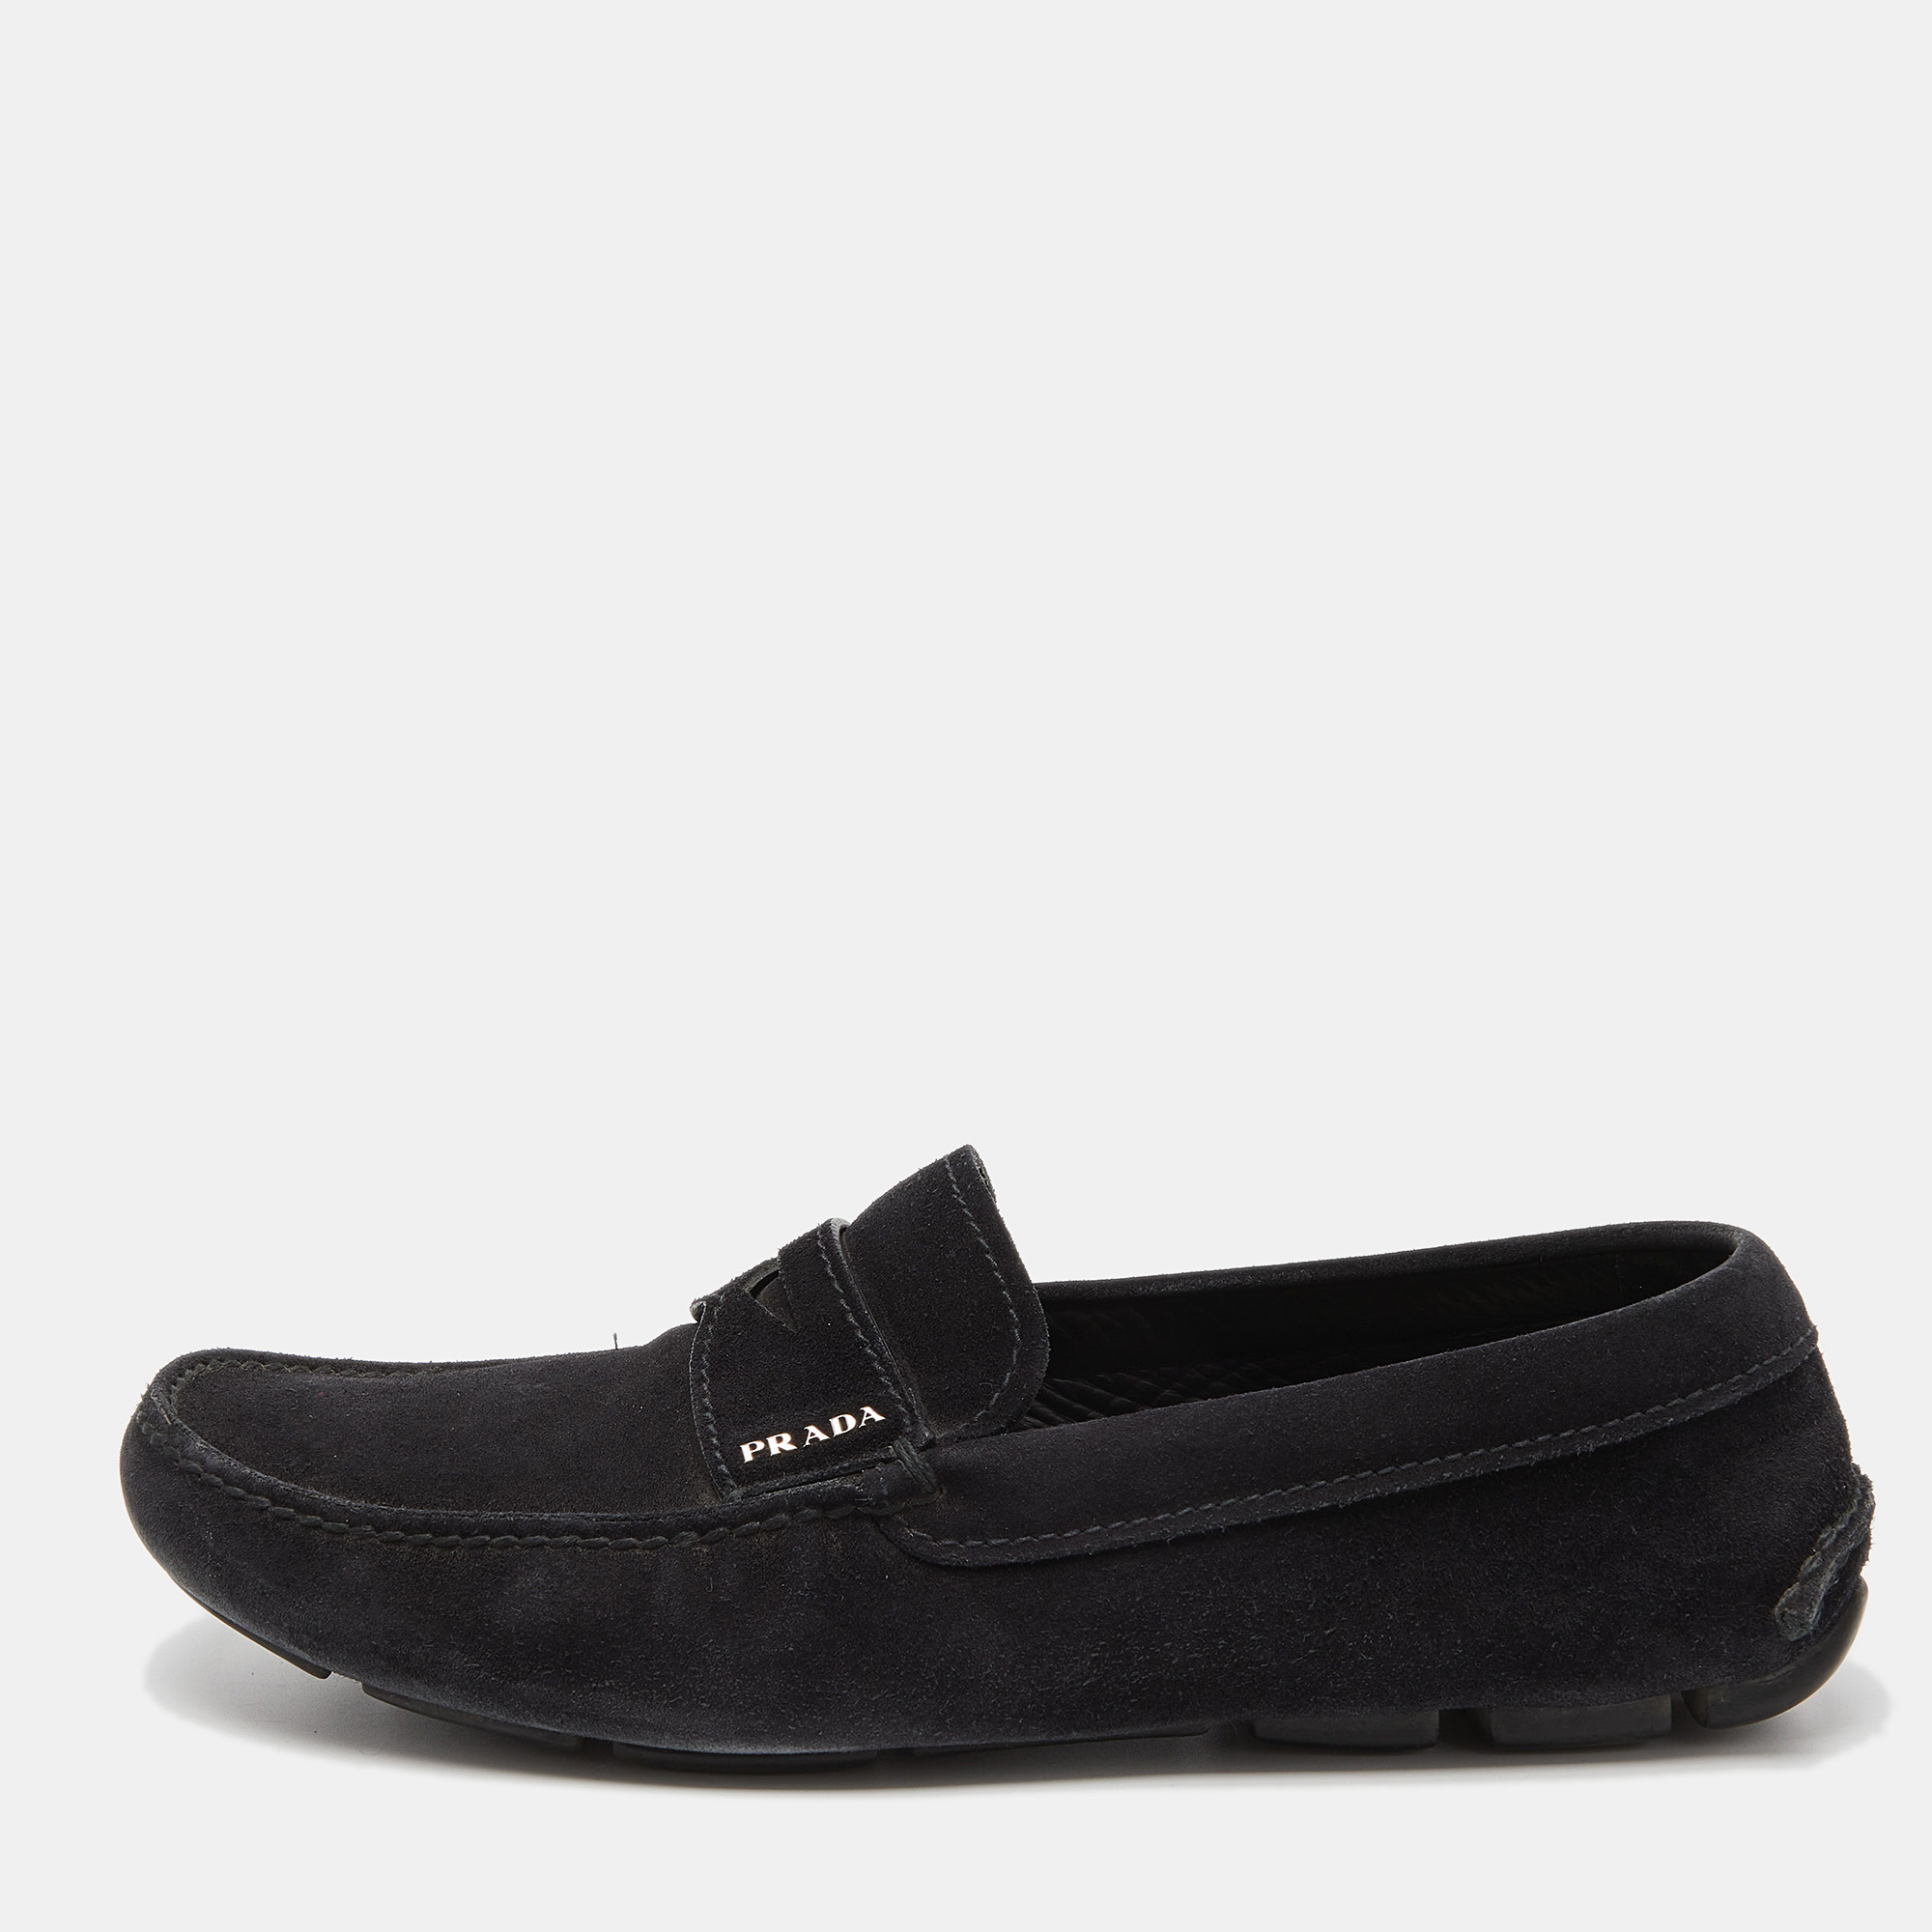 Pre-owned Prada Black Suede Penny Loafers Size 40.5